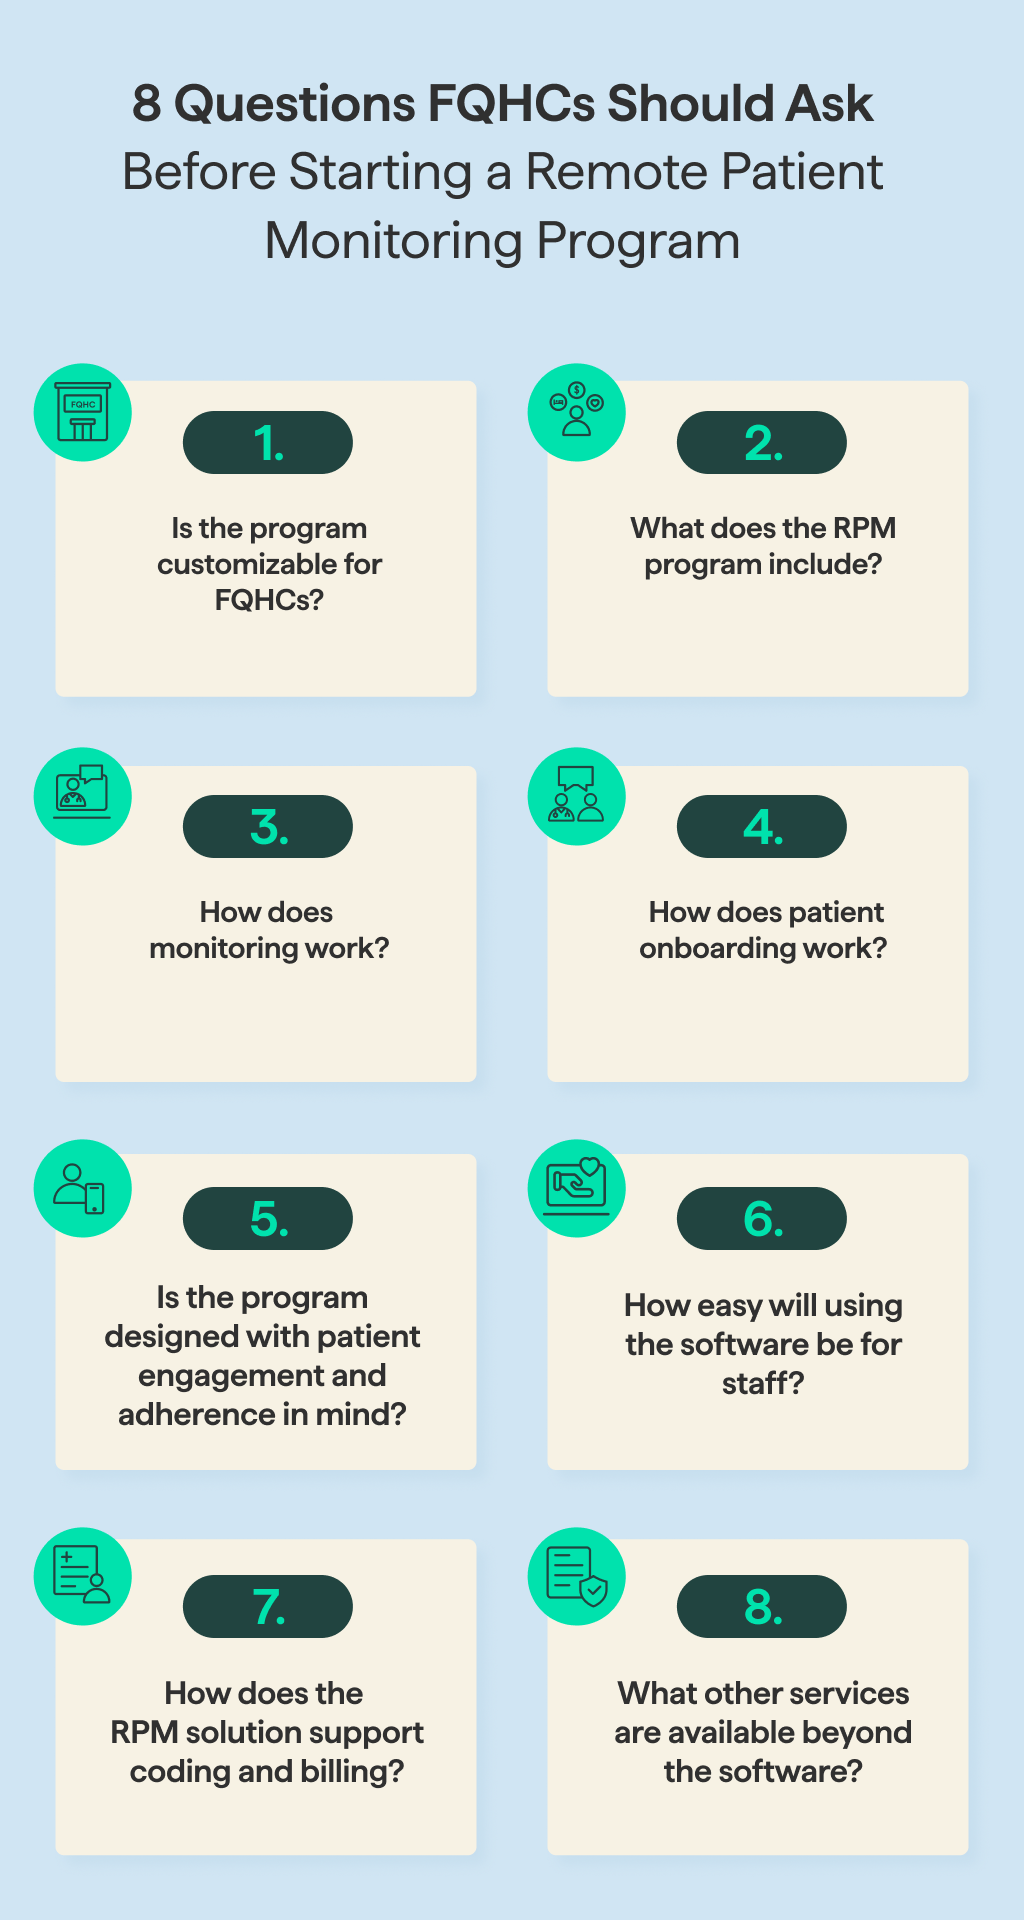 An infographic covering the questions FQHCs should ask before starting a remote patient monitoring program